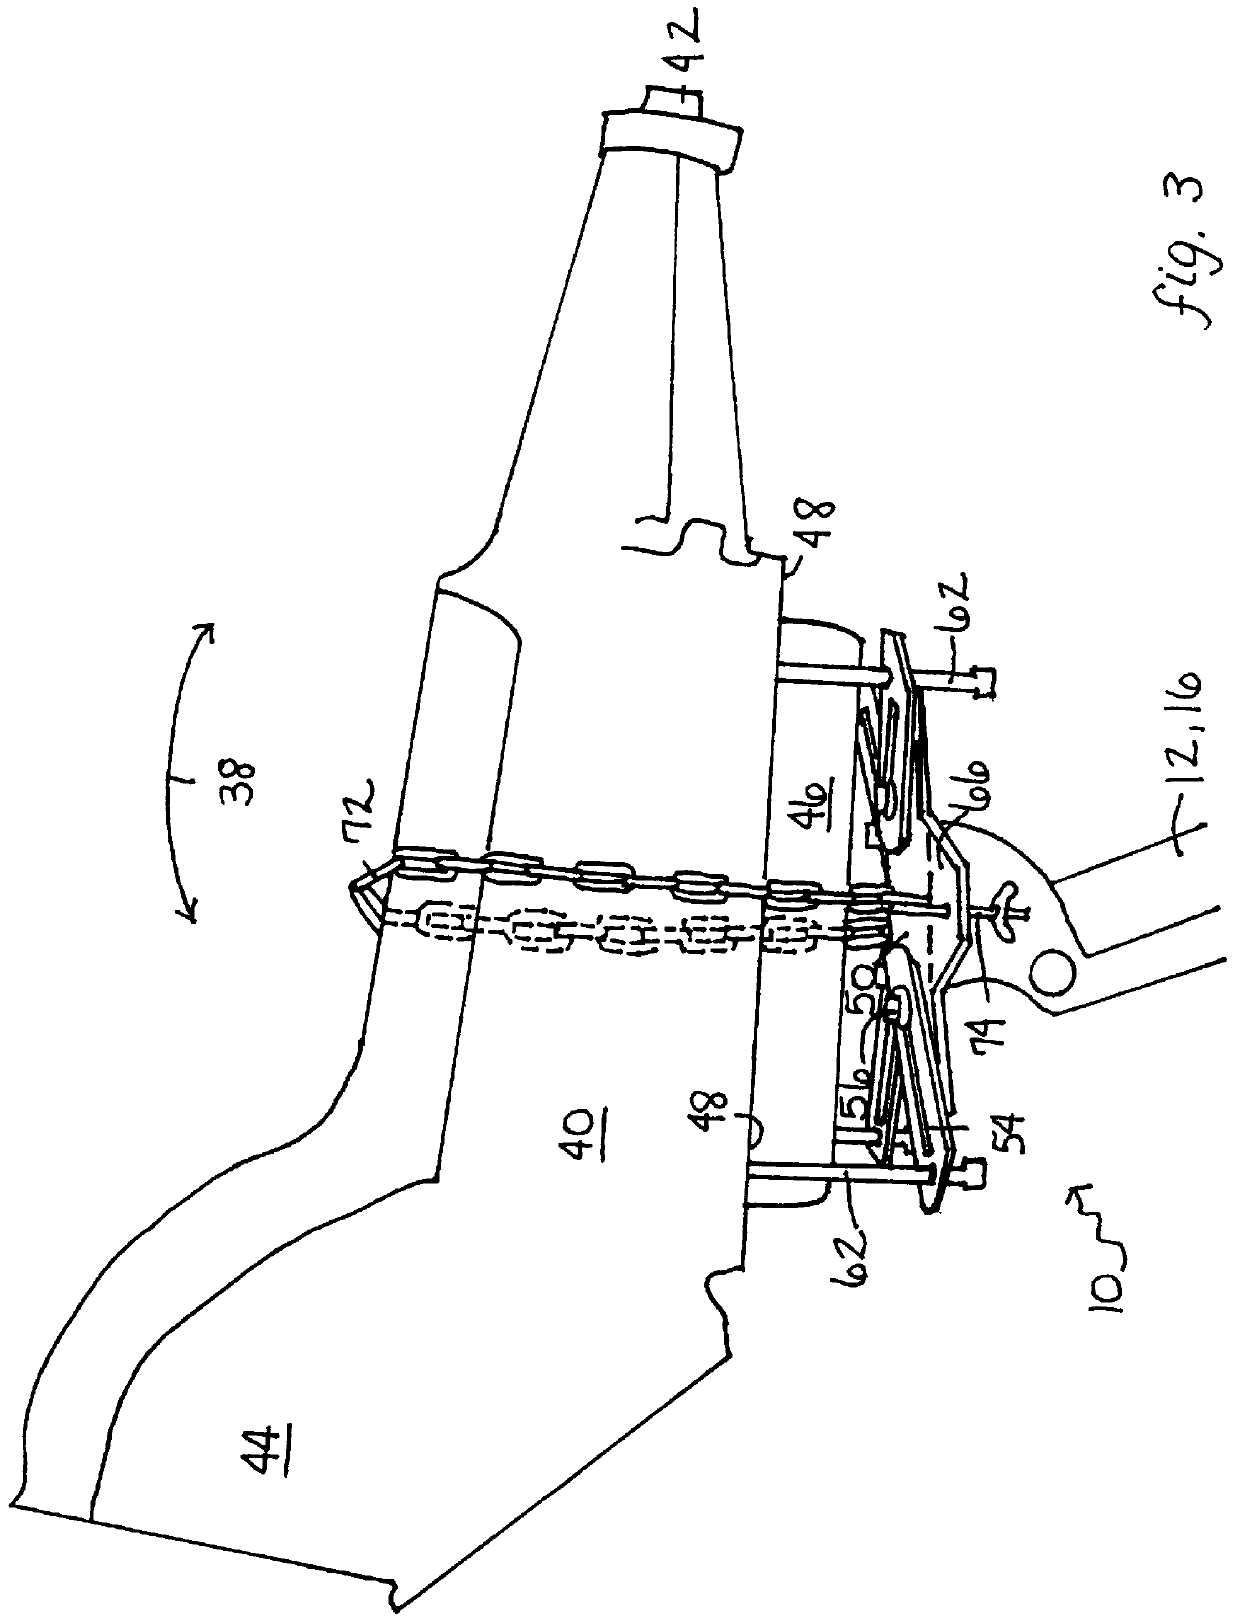 Converter for converting a conventional car jack into a transmission jack